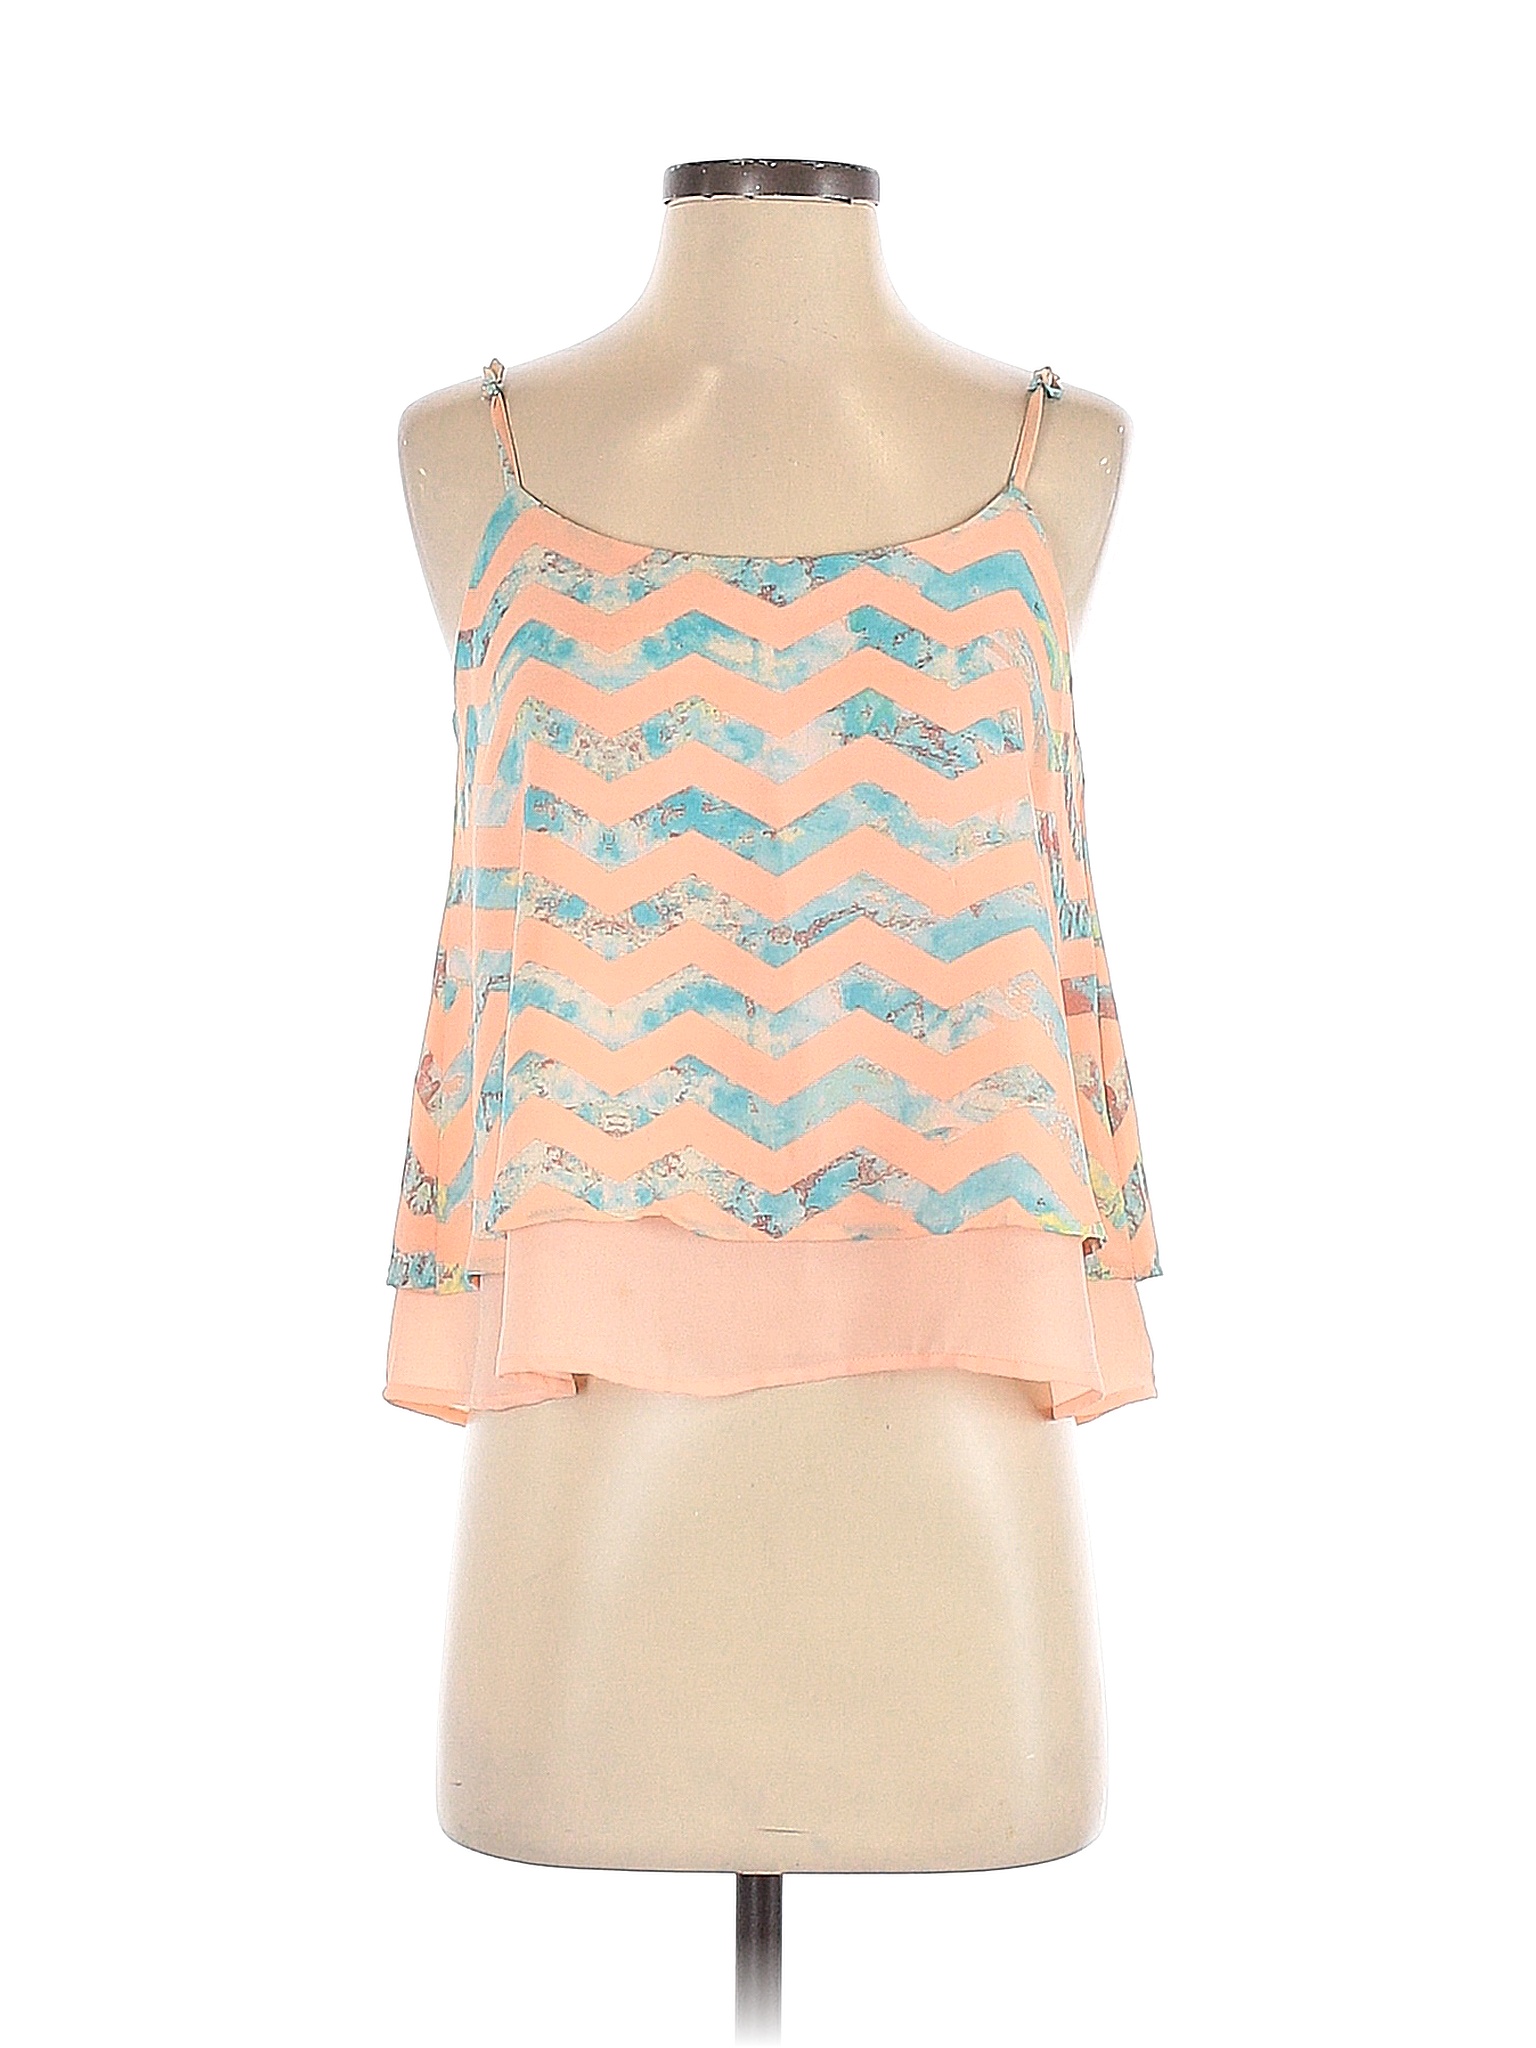 Charlotte Russe Pink Sleeveless Top Size XL - 72% off